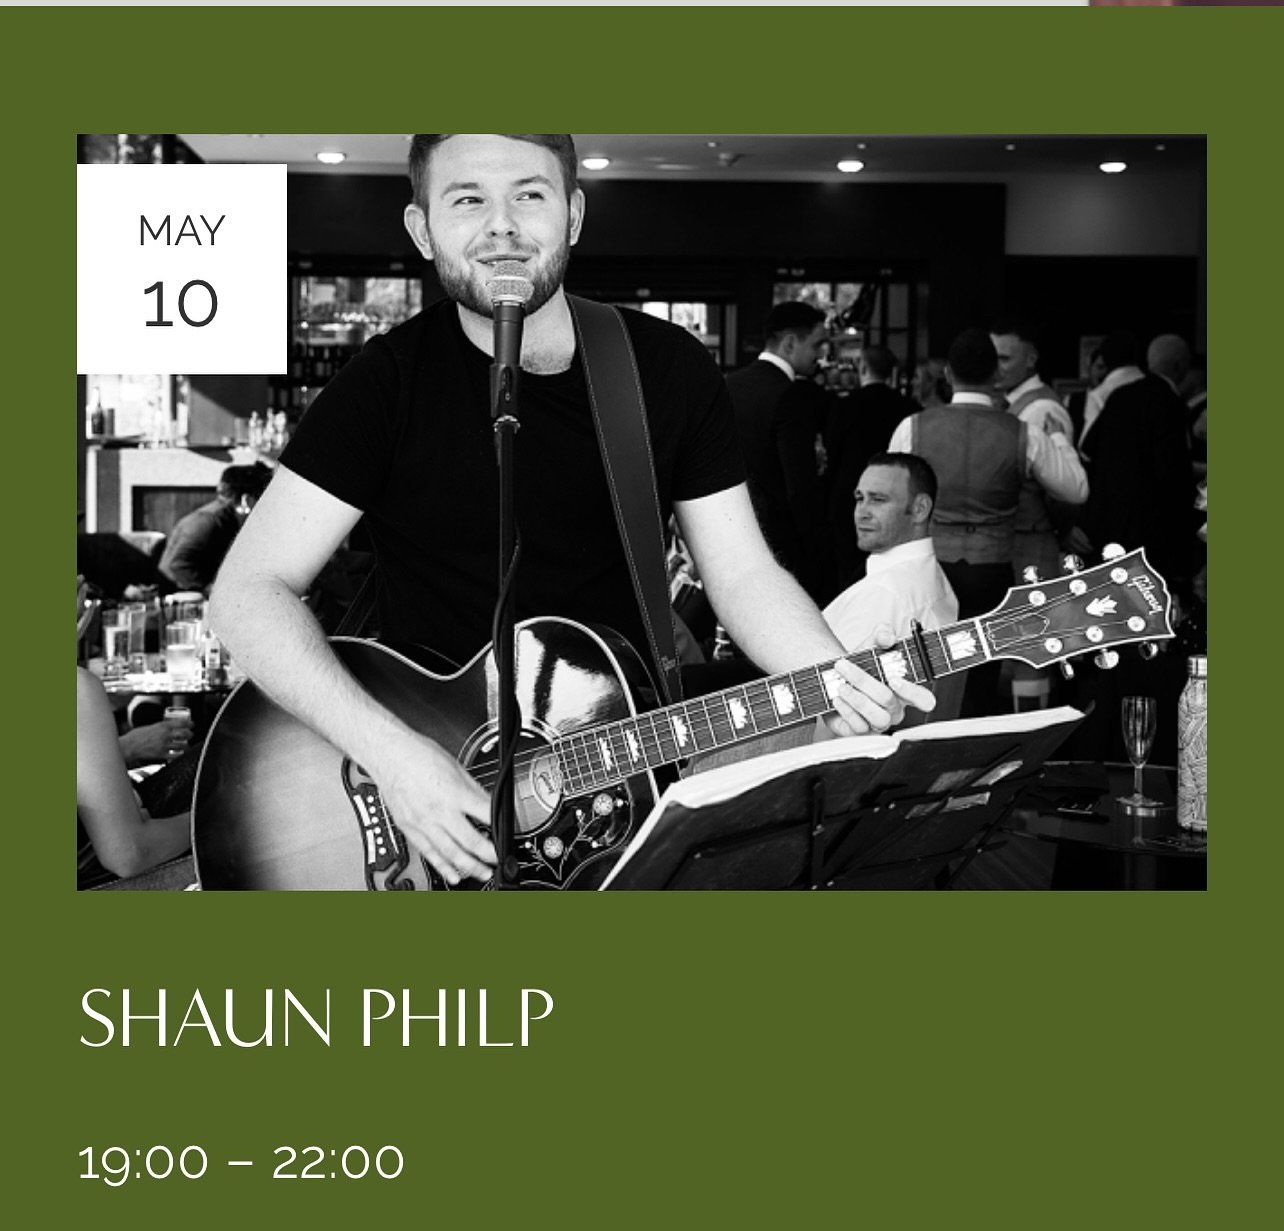 It&rsquo;s another live music Friday this week at The Adamson with brilliant local talent @shaunphilpmusic 

Head over to our website to reserve your table for dinner - bar tables allocated on a first come basis. 

The Adamson Hotel - getting the wee